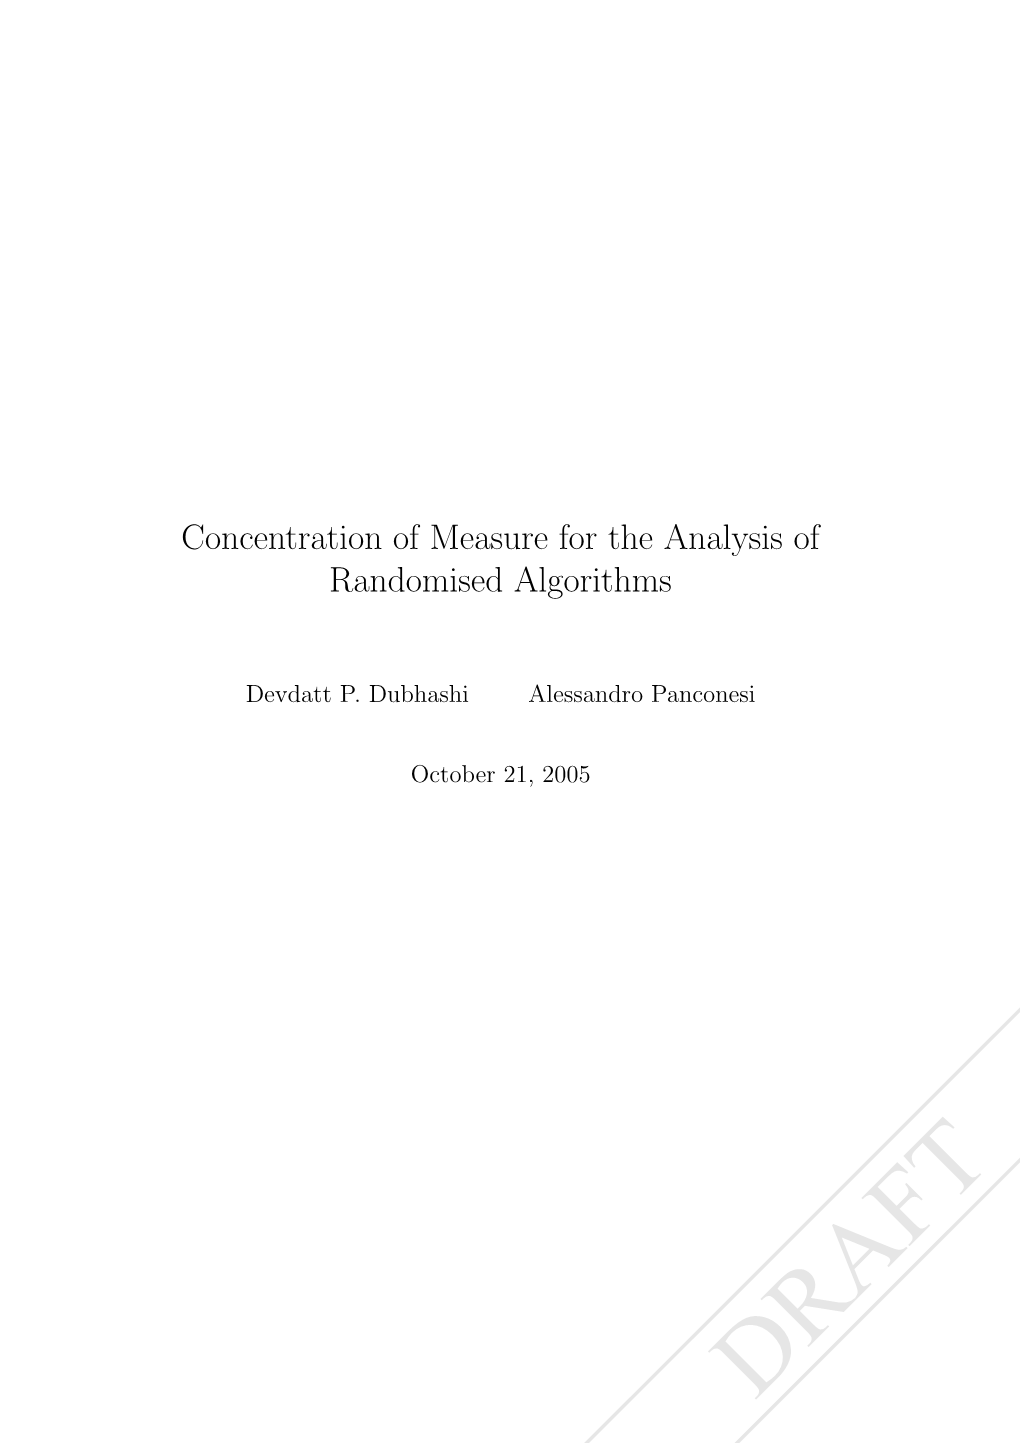 Concentration of Measure for the Analysis of Randomised Algorithms